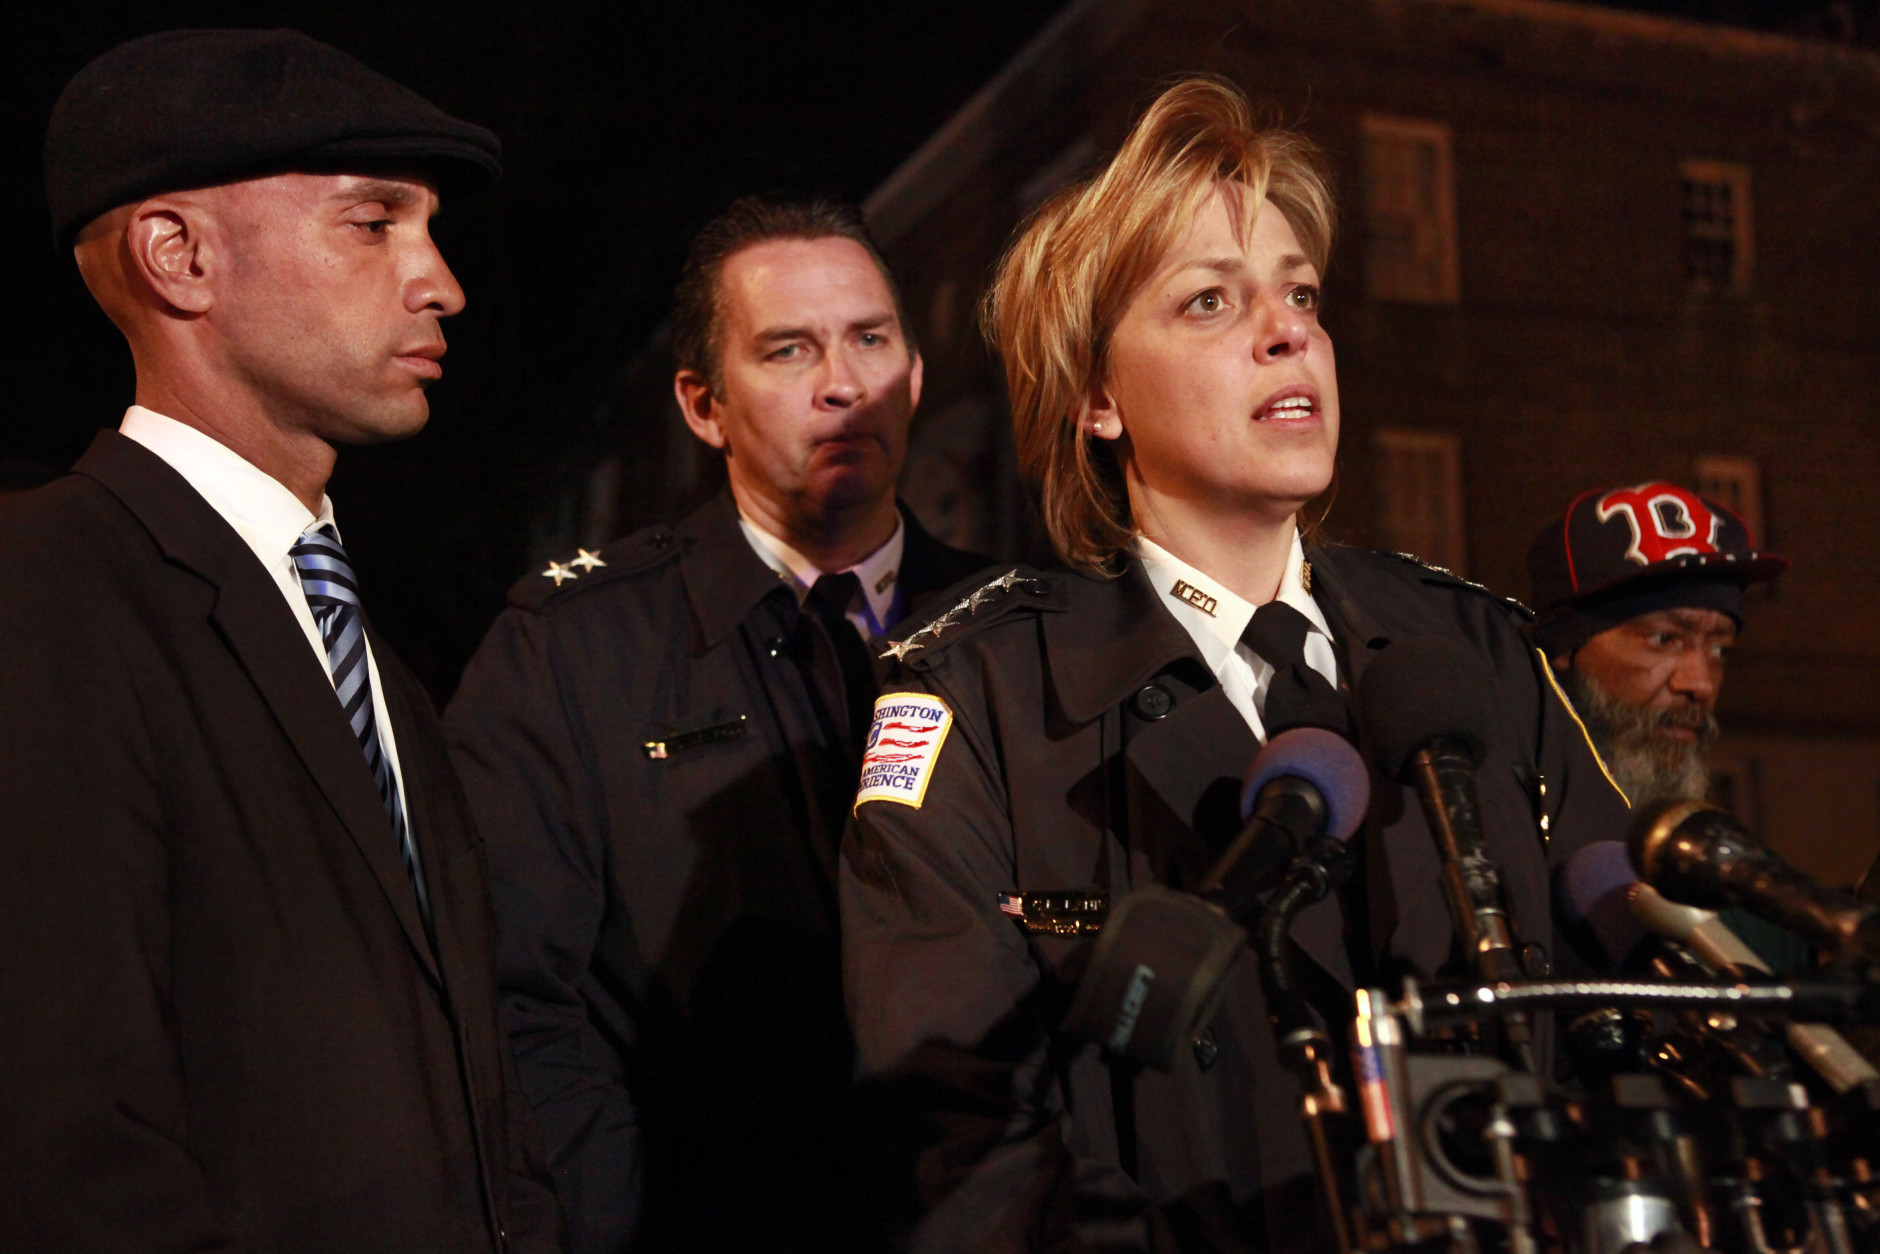 District of Columbia Mayor Adrian Fenty, left, Assistant Police Chief Peter Newsham, and Police Chief Cathy Lanier speak about the shooting of ten people, of whom four died, in Washington, on Wednesday, March 31, 2010. At right is William Cheek, grandfather of one of the victims. (AP Photo/Jacquelyn Martin)